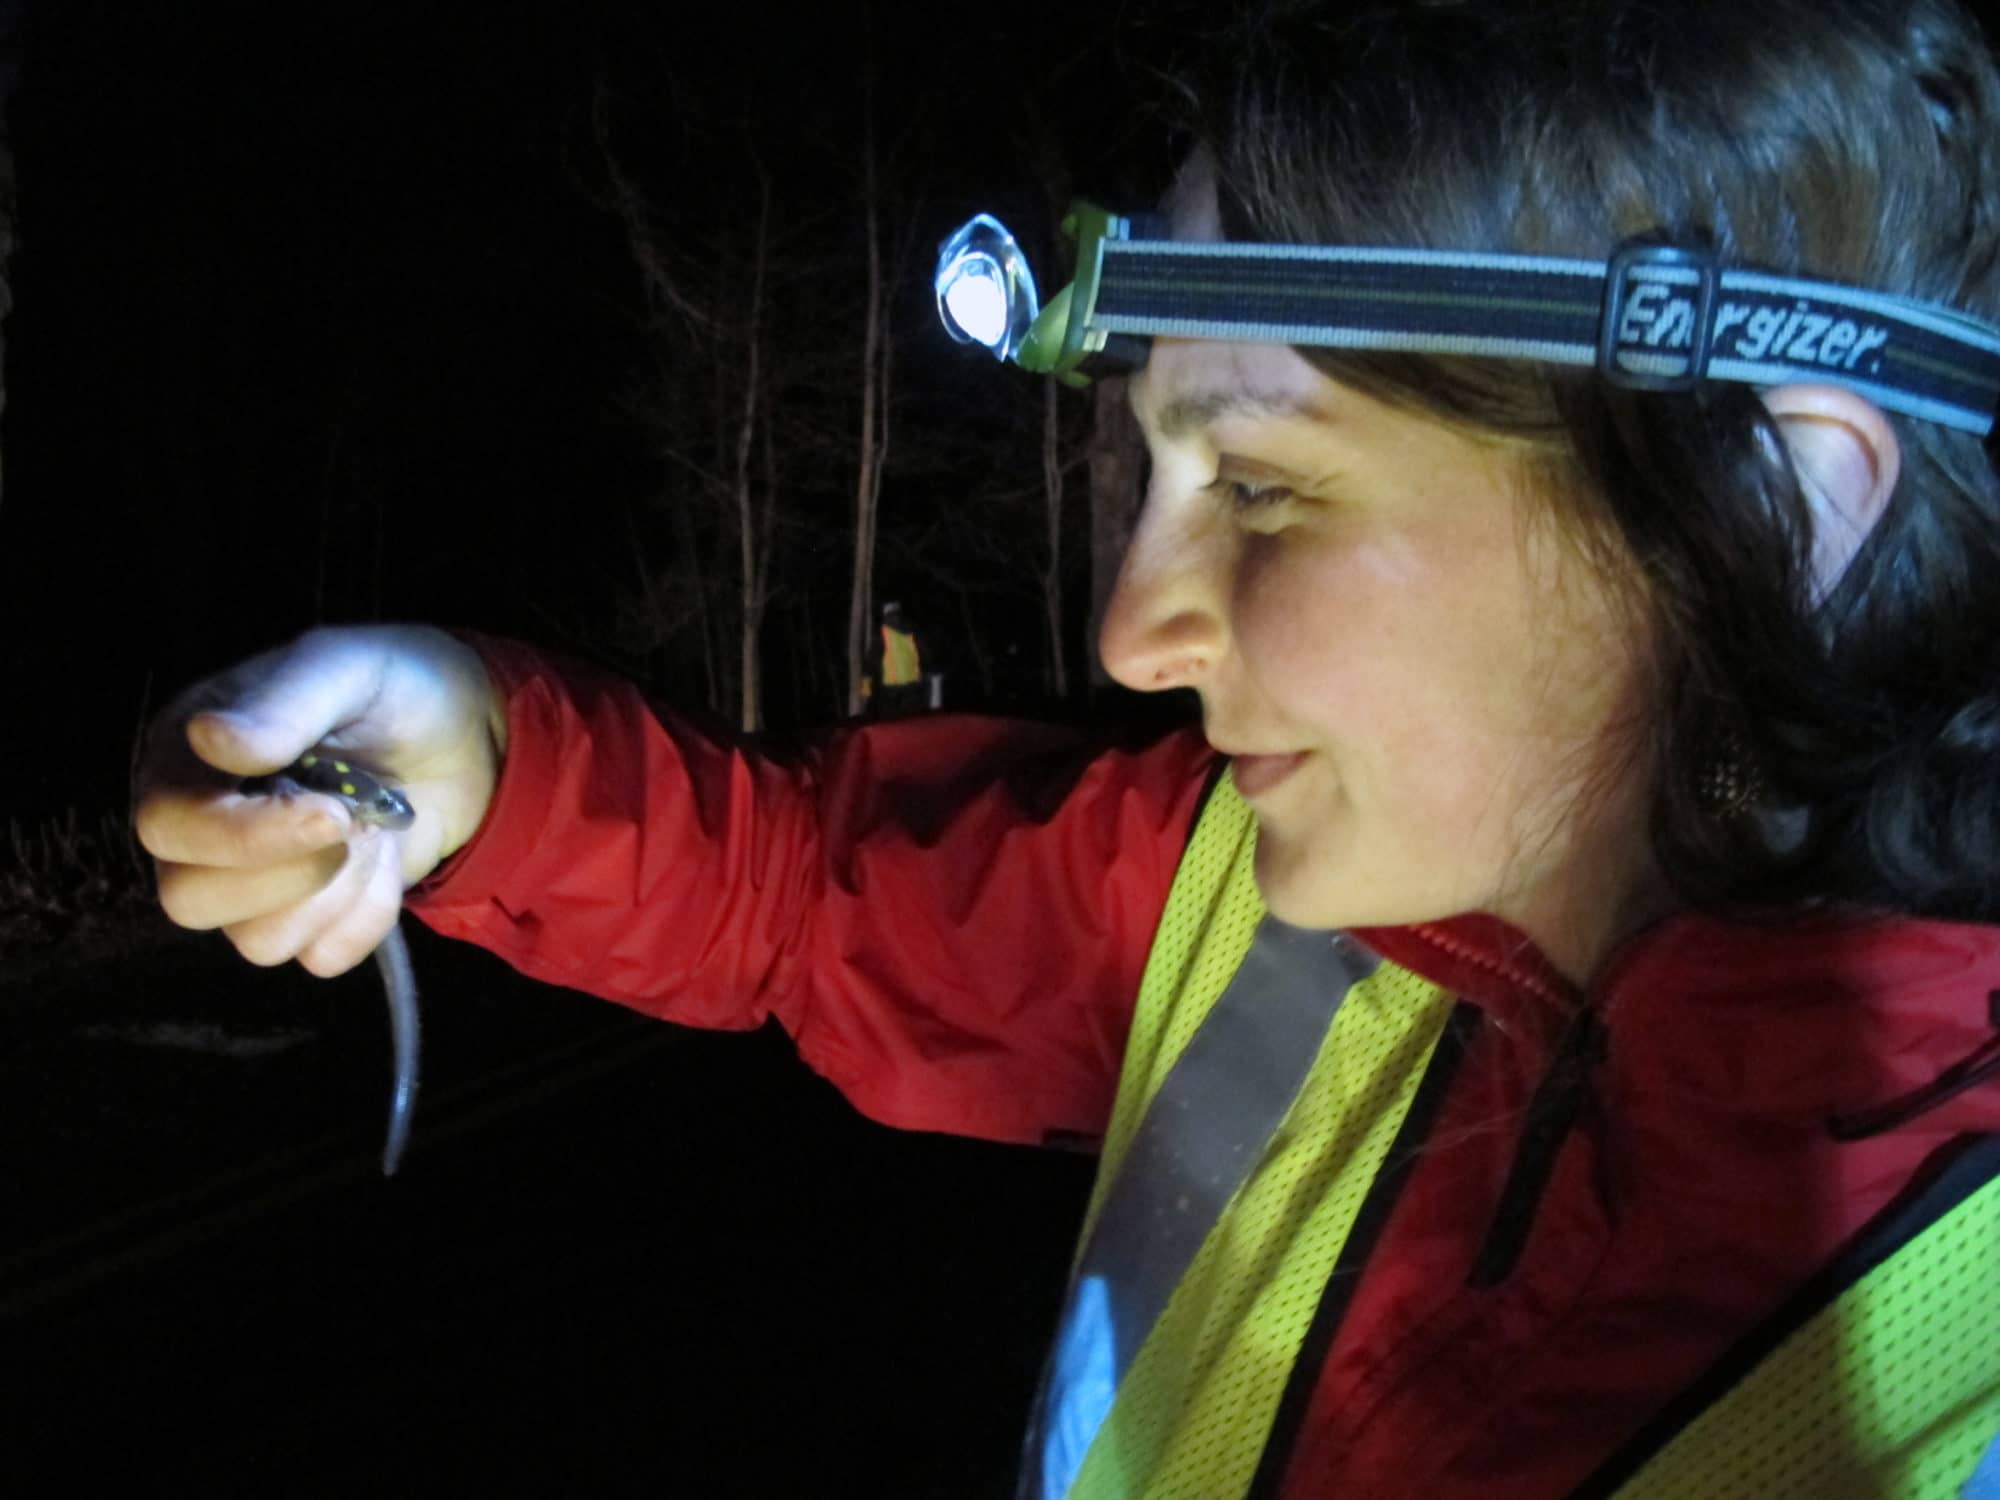 A Salamander Brigadier looks with wonder at a spotted salamander on a Big Night. (photo © Brett Amy Thelen)